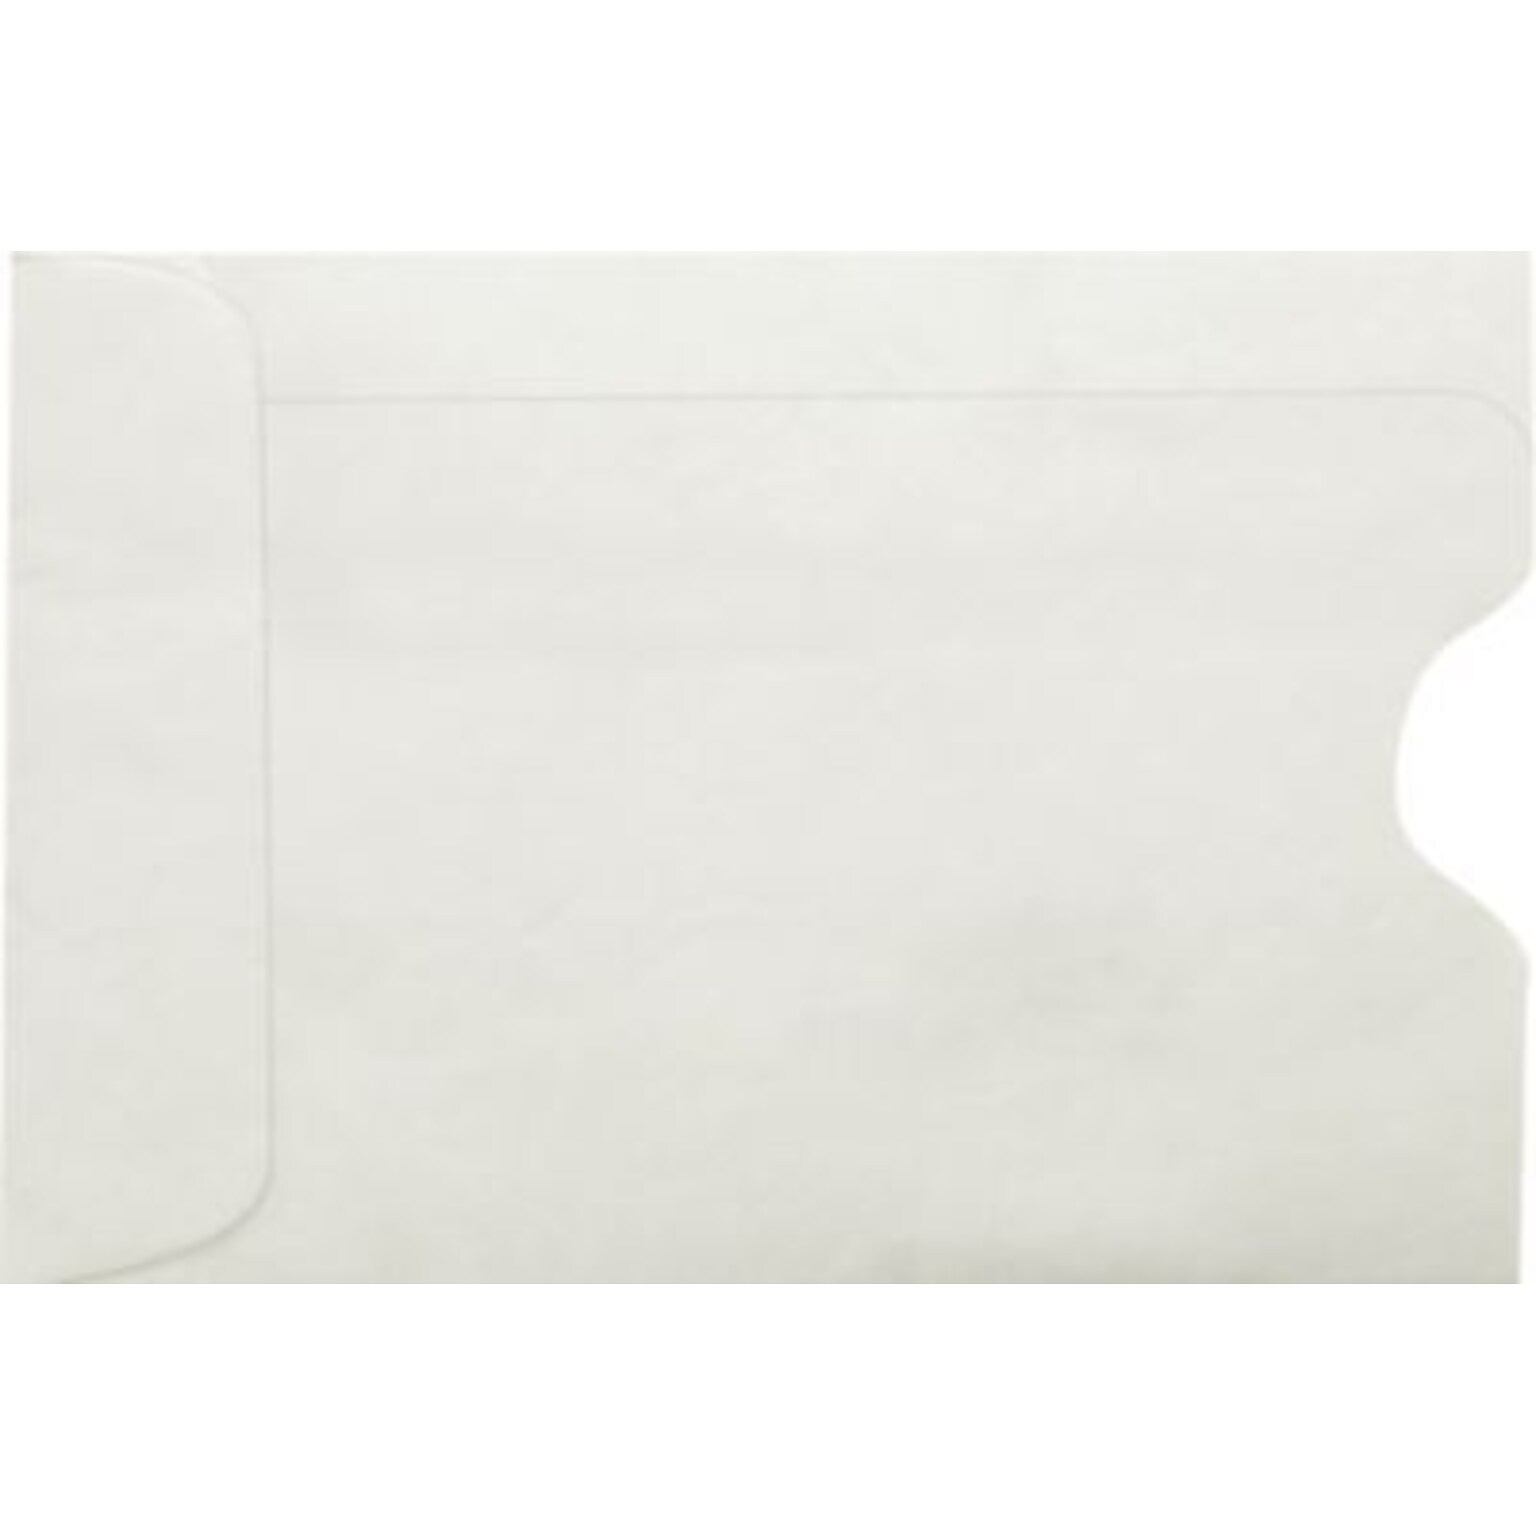 LUX Open End Currency Envelope, 2 3/8 x 3 1/2, Natural, 500/Pack (1801-80N-500)